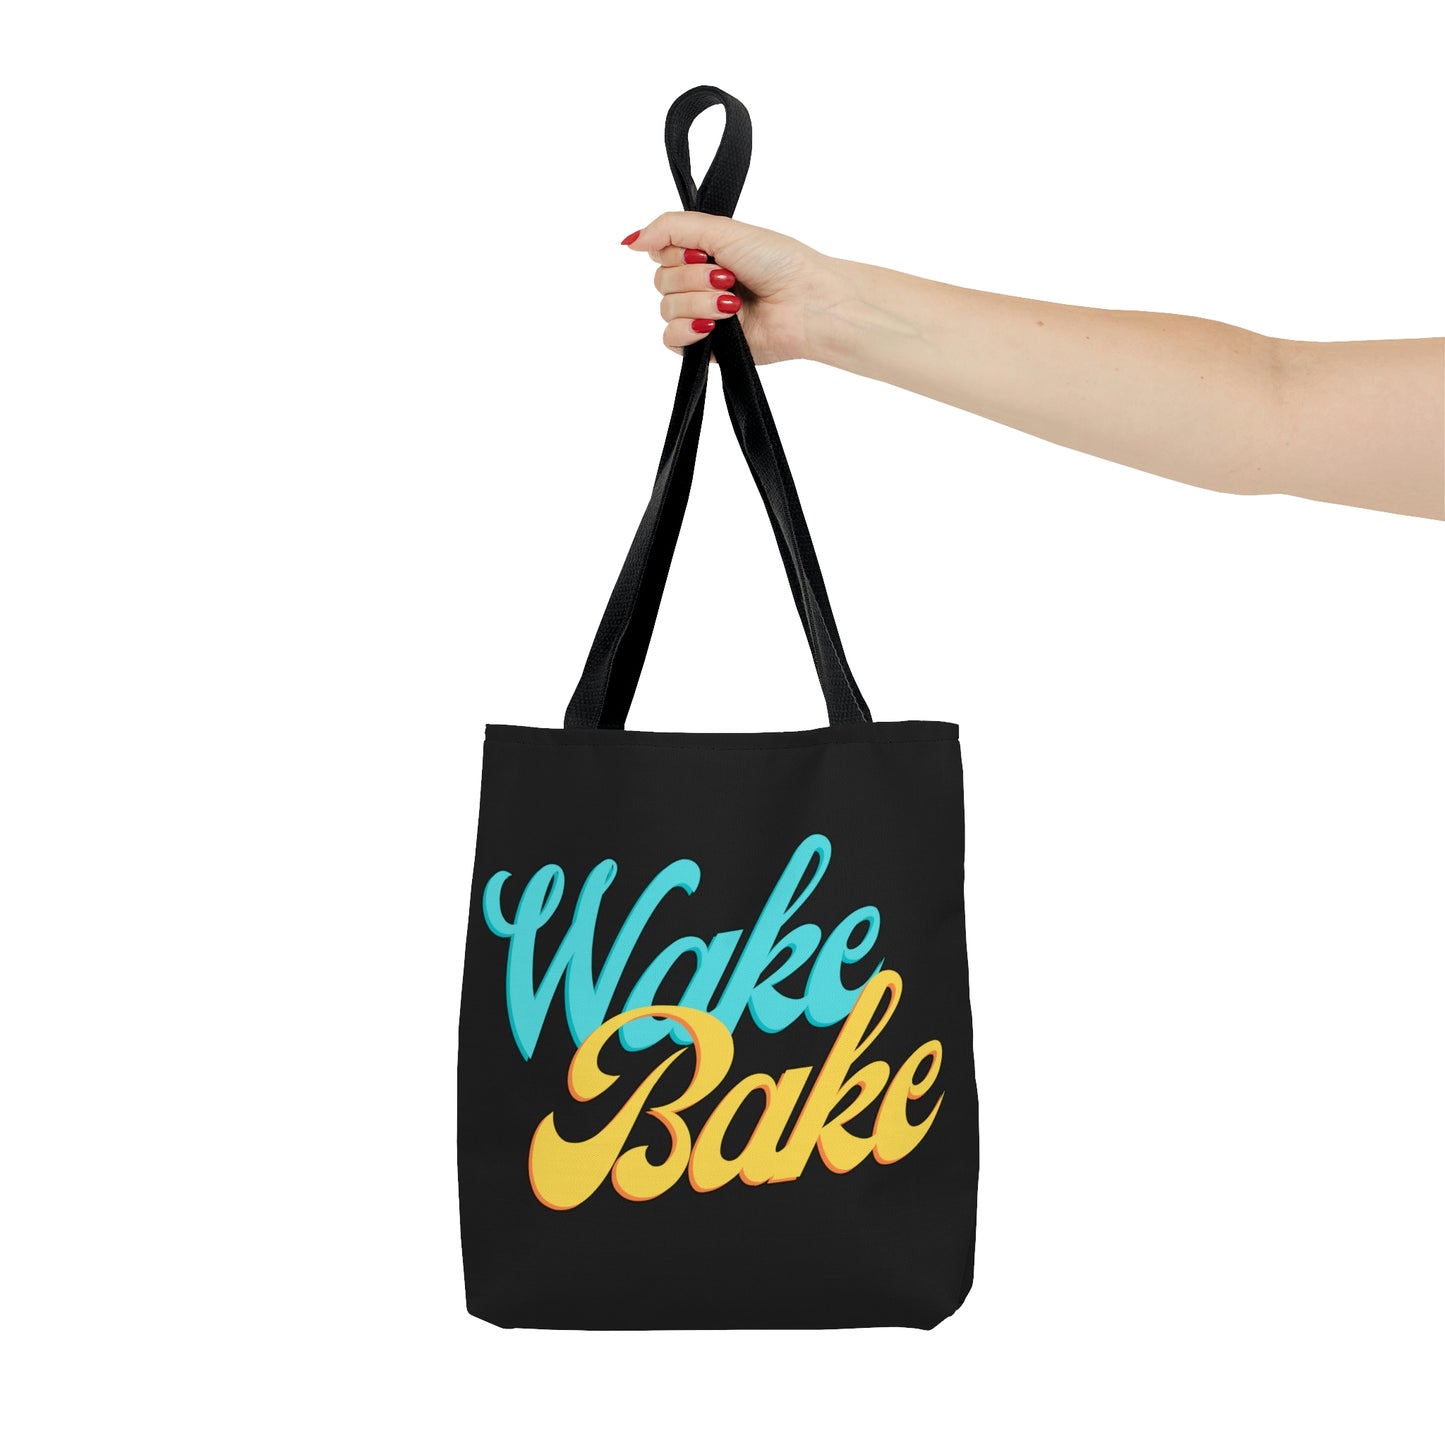 A perfect view of the Wake and bake Black Beach Weed Tote Bag